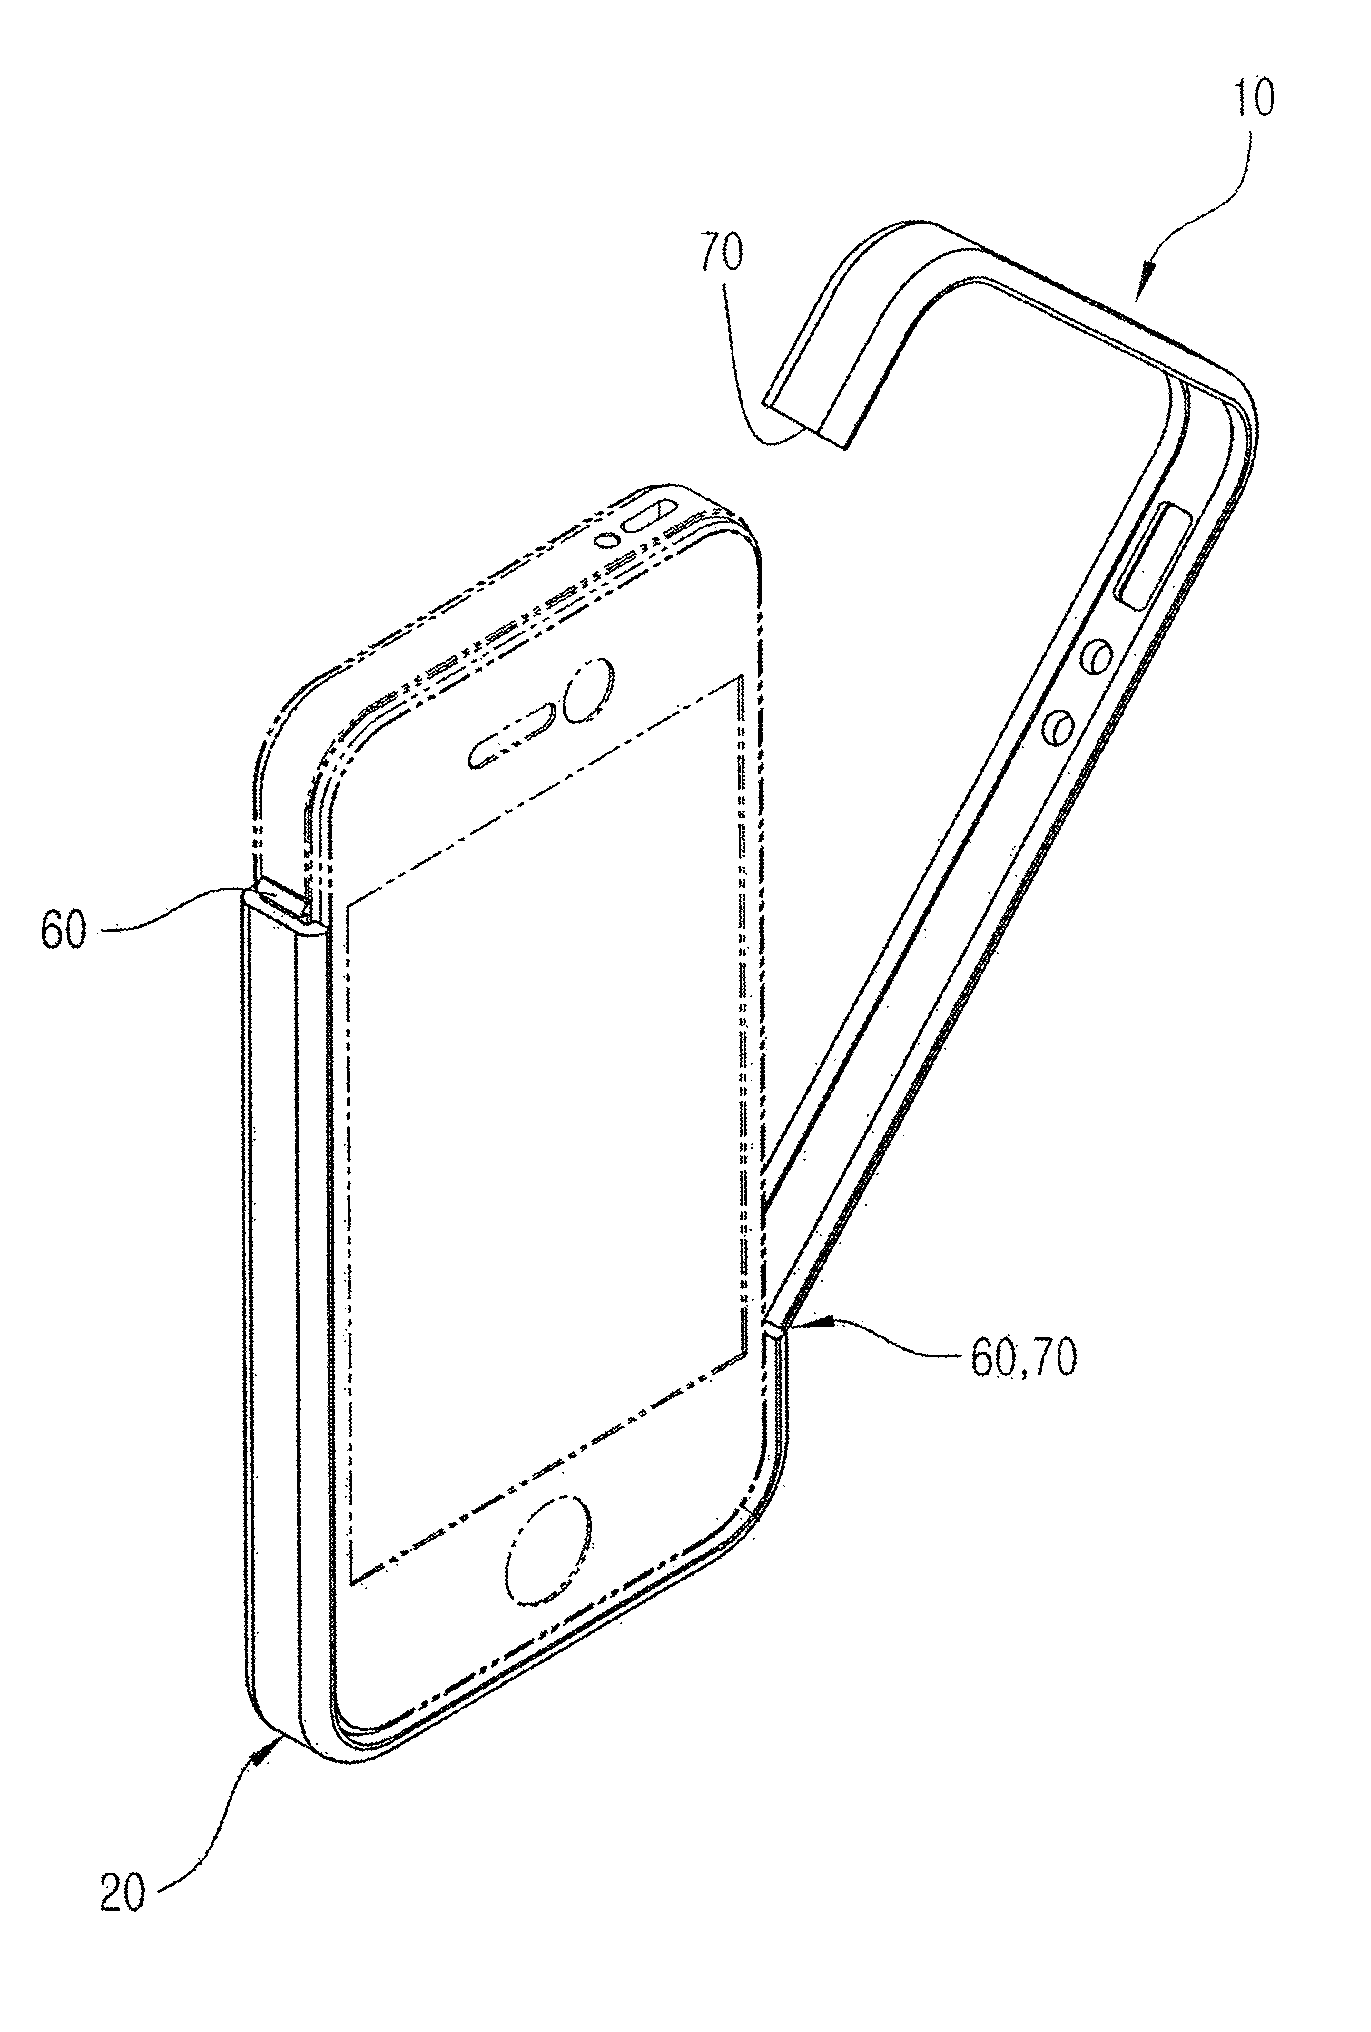 Protective case for portable electronic device